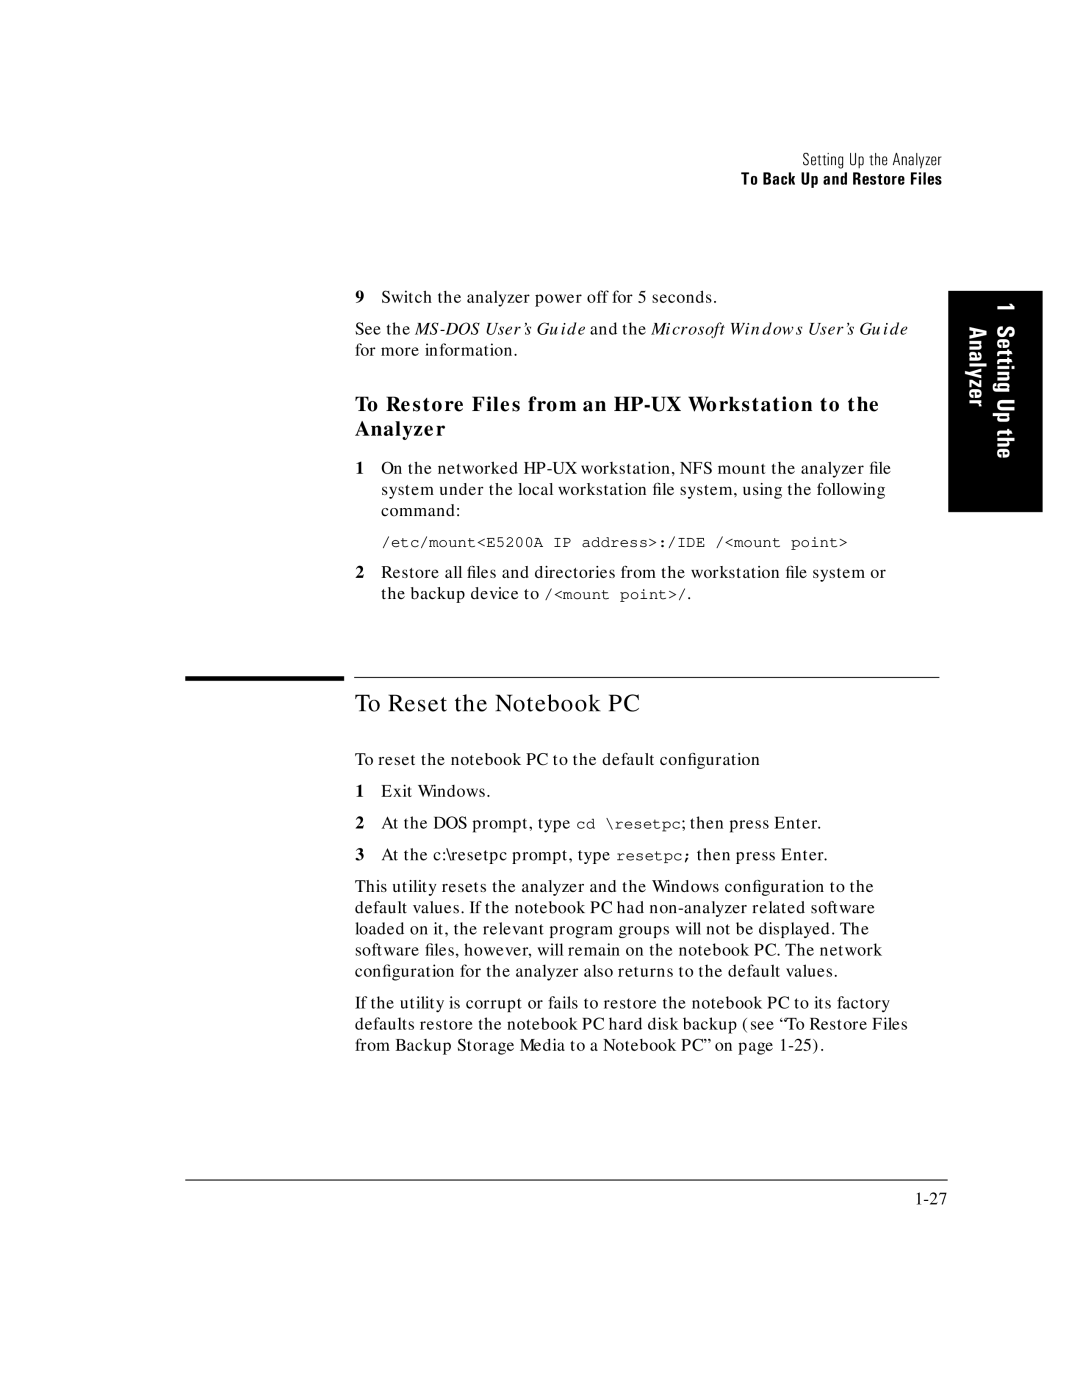 HP E5200A manual To Reset the Notebook PC, To Restore Files from an HP-UX Workstation to the Analyzer 